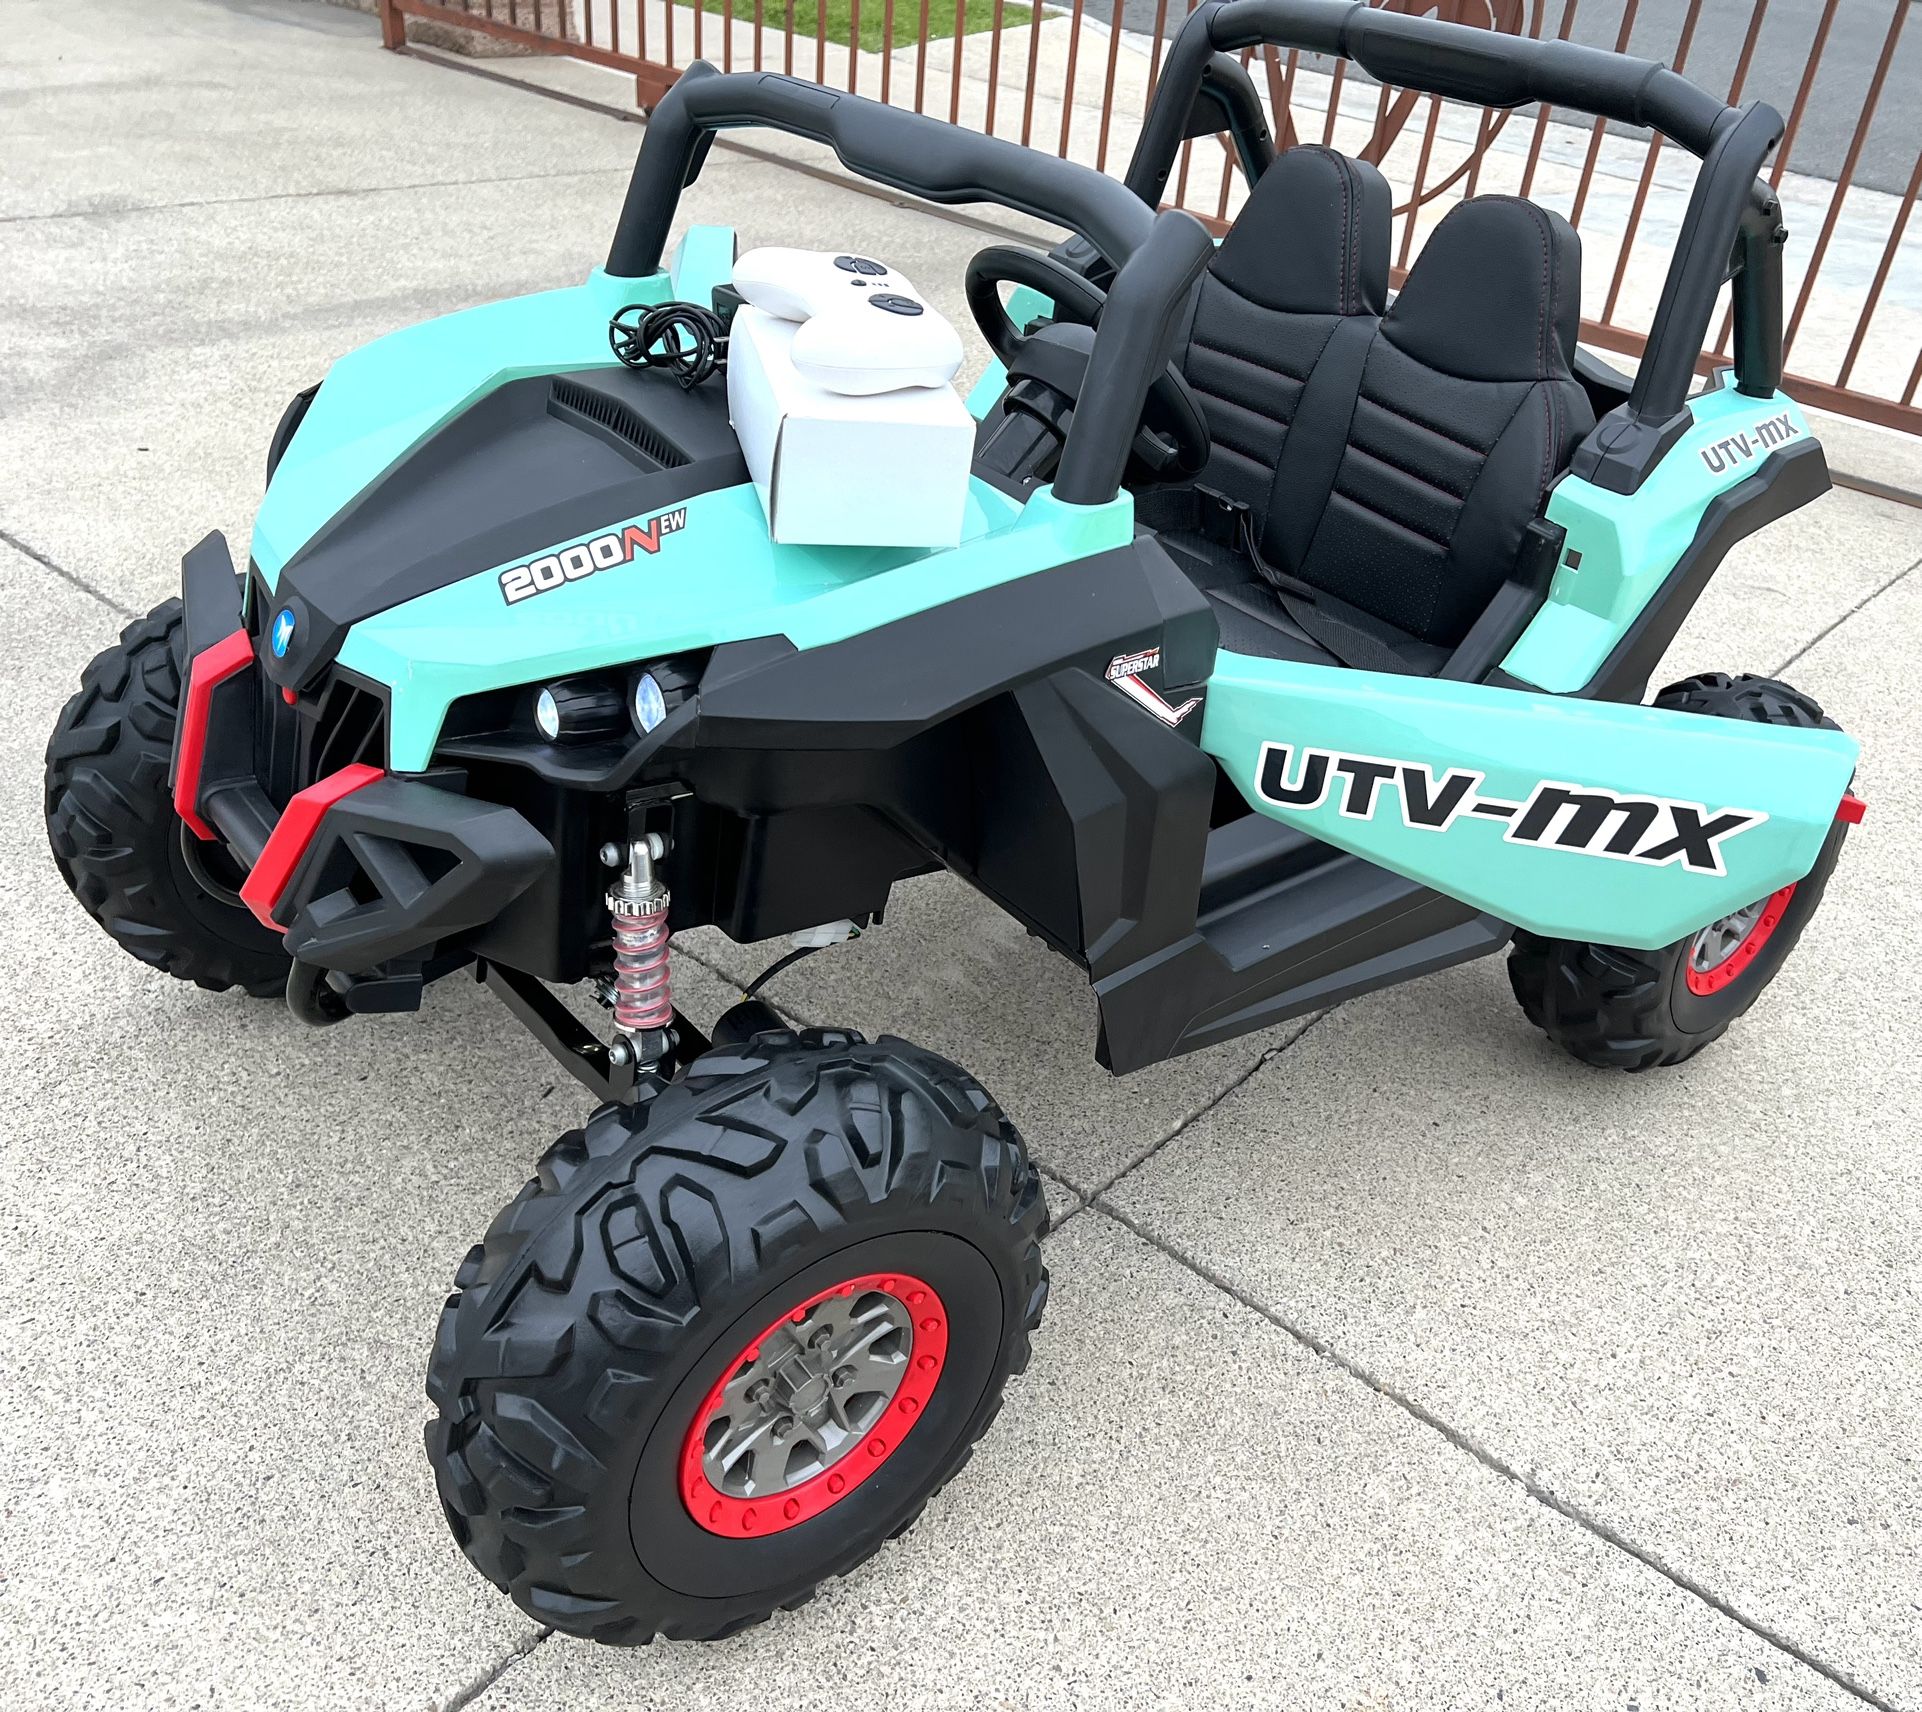 Big Off Road UTV Mx 2seater 4x4 12volt RUBBER TIRES Remote Control Model Electric Kid Ride On Car Power Wheels - NEWEST MODEL Work with iPhone 📲 App